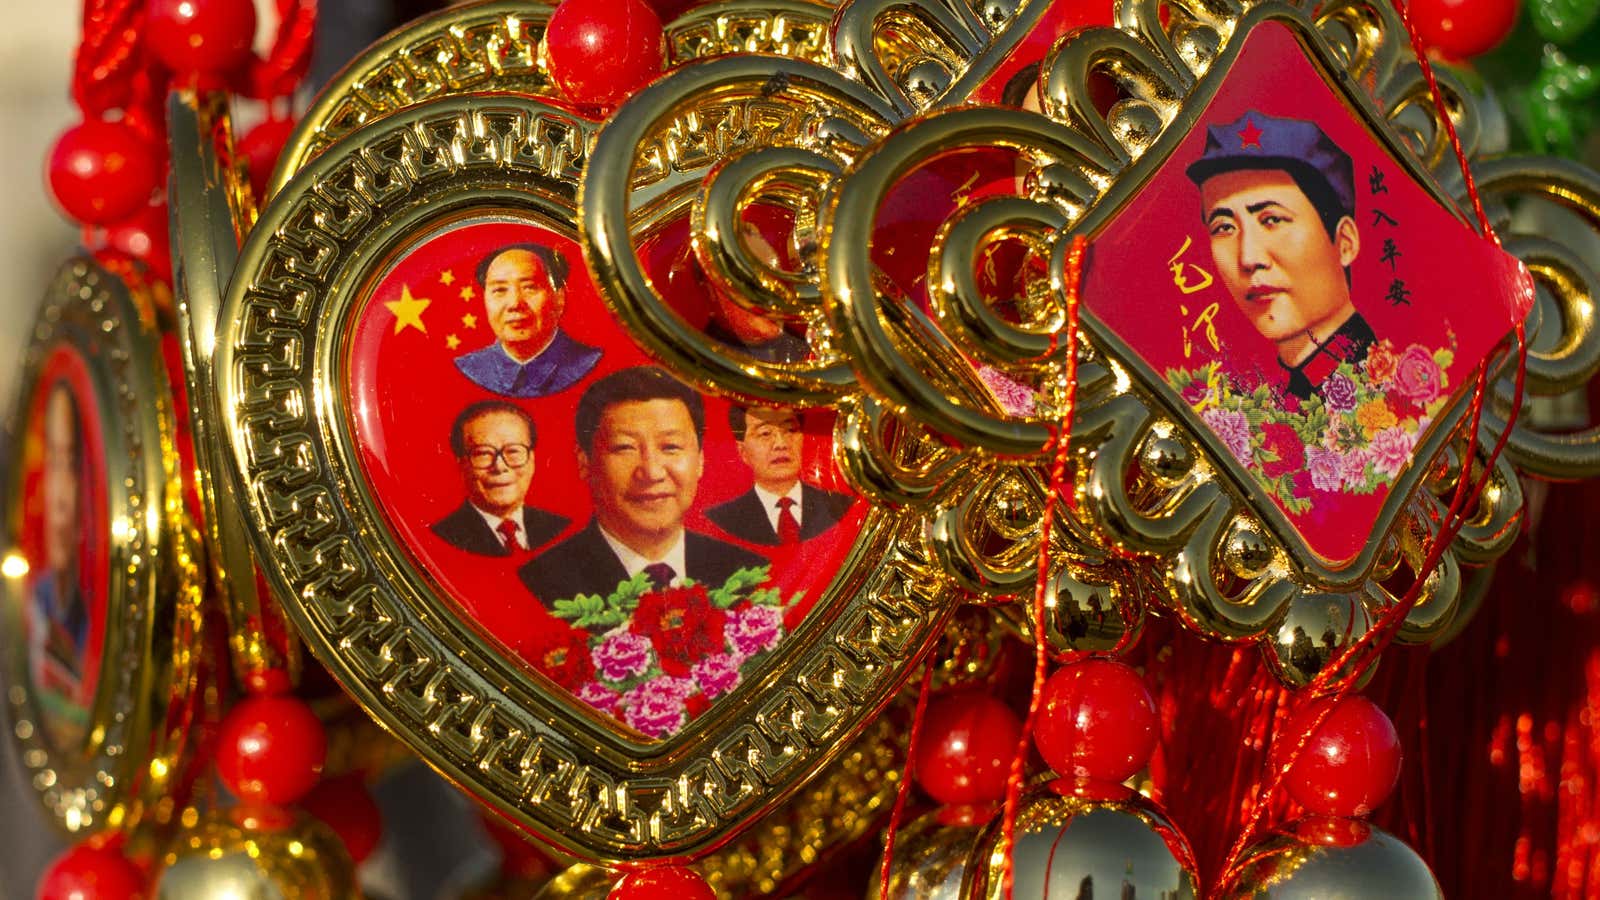 China has long been a master of change and stability.